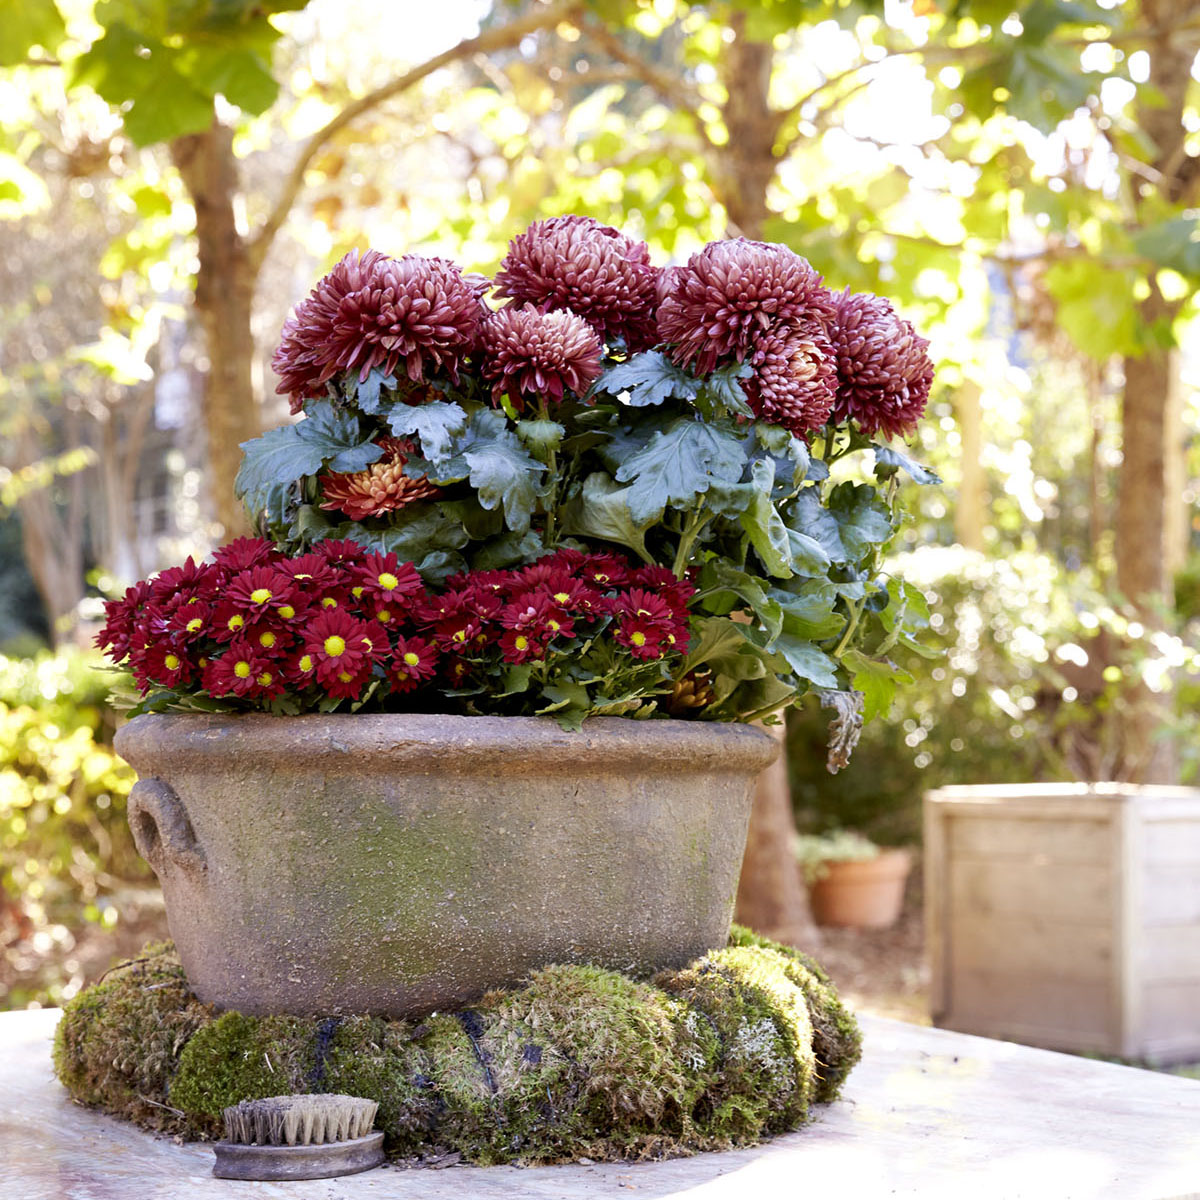 Large clay pot filled with burgundy chrysanthemums and with mounds of moss around base.